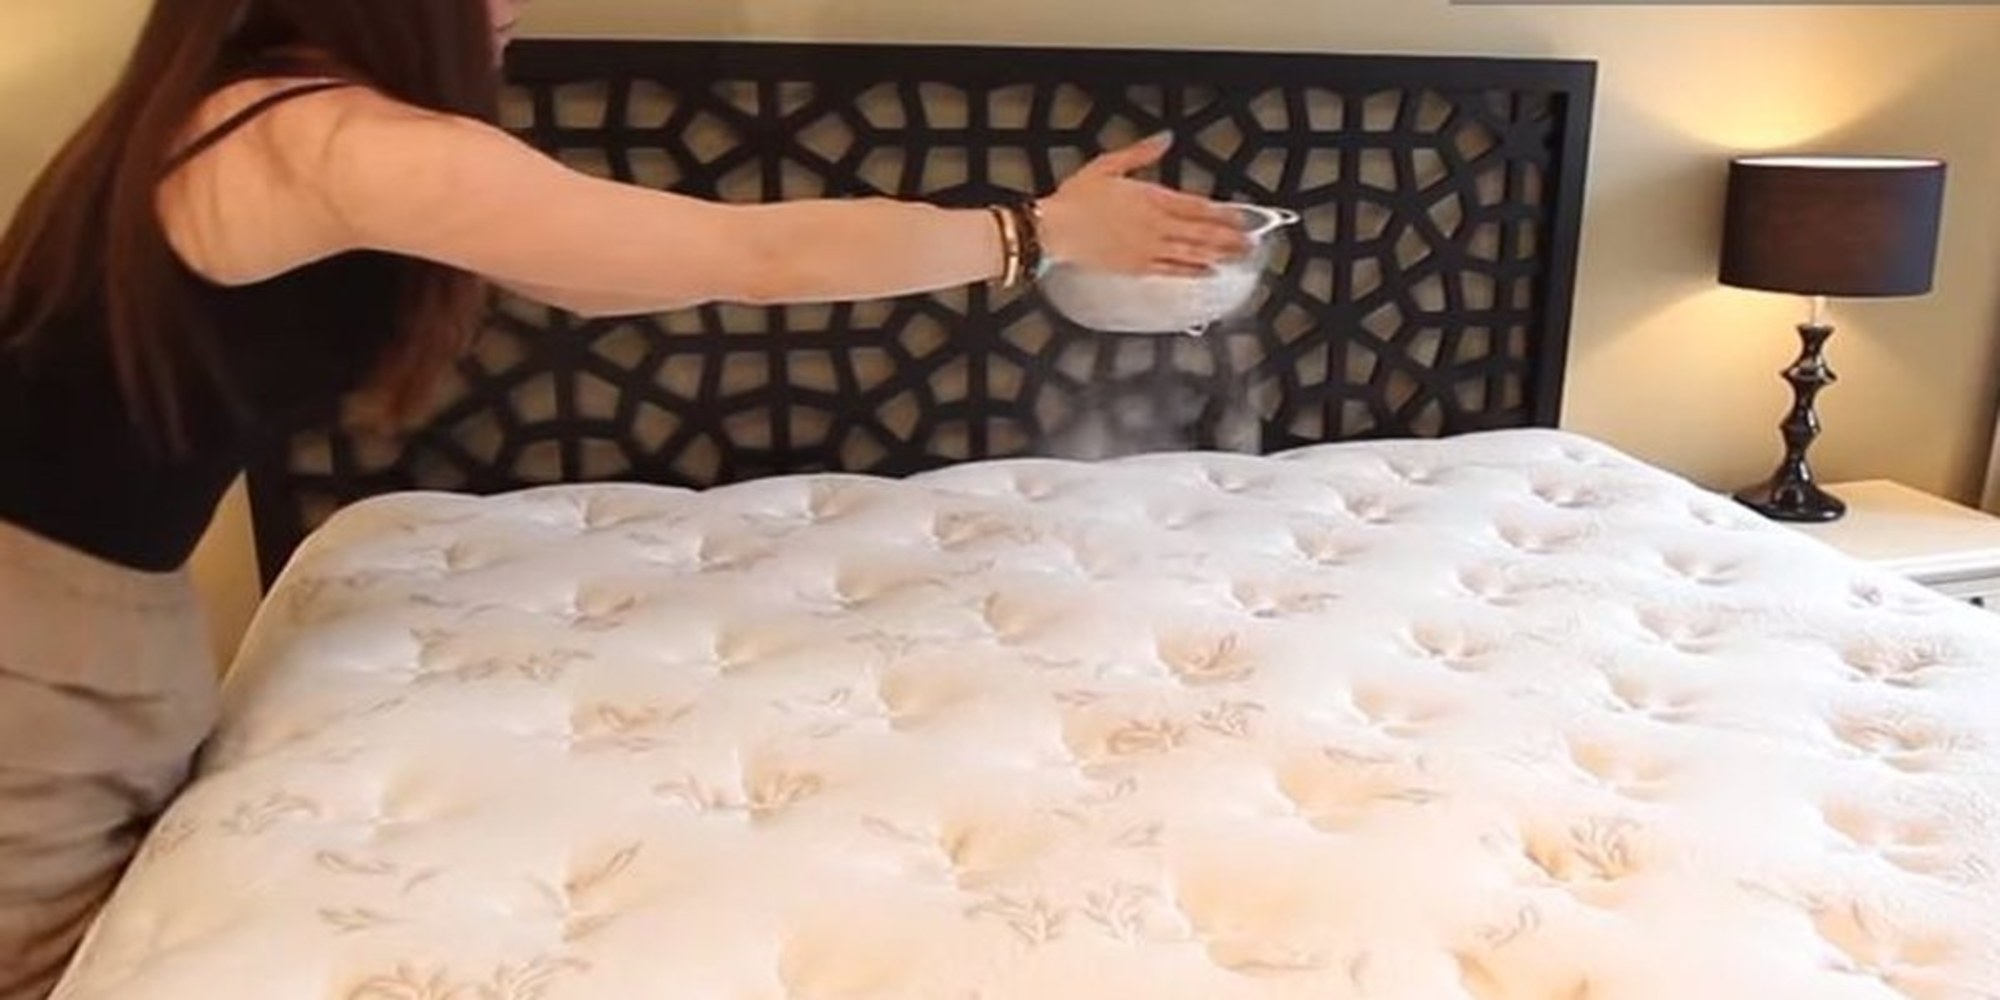 The Disgusting Things Lurking In Your Mattress And How To Get Rid Of Them